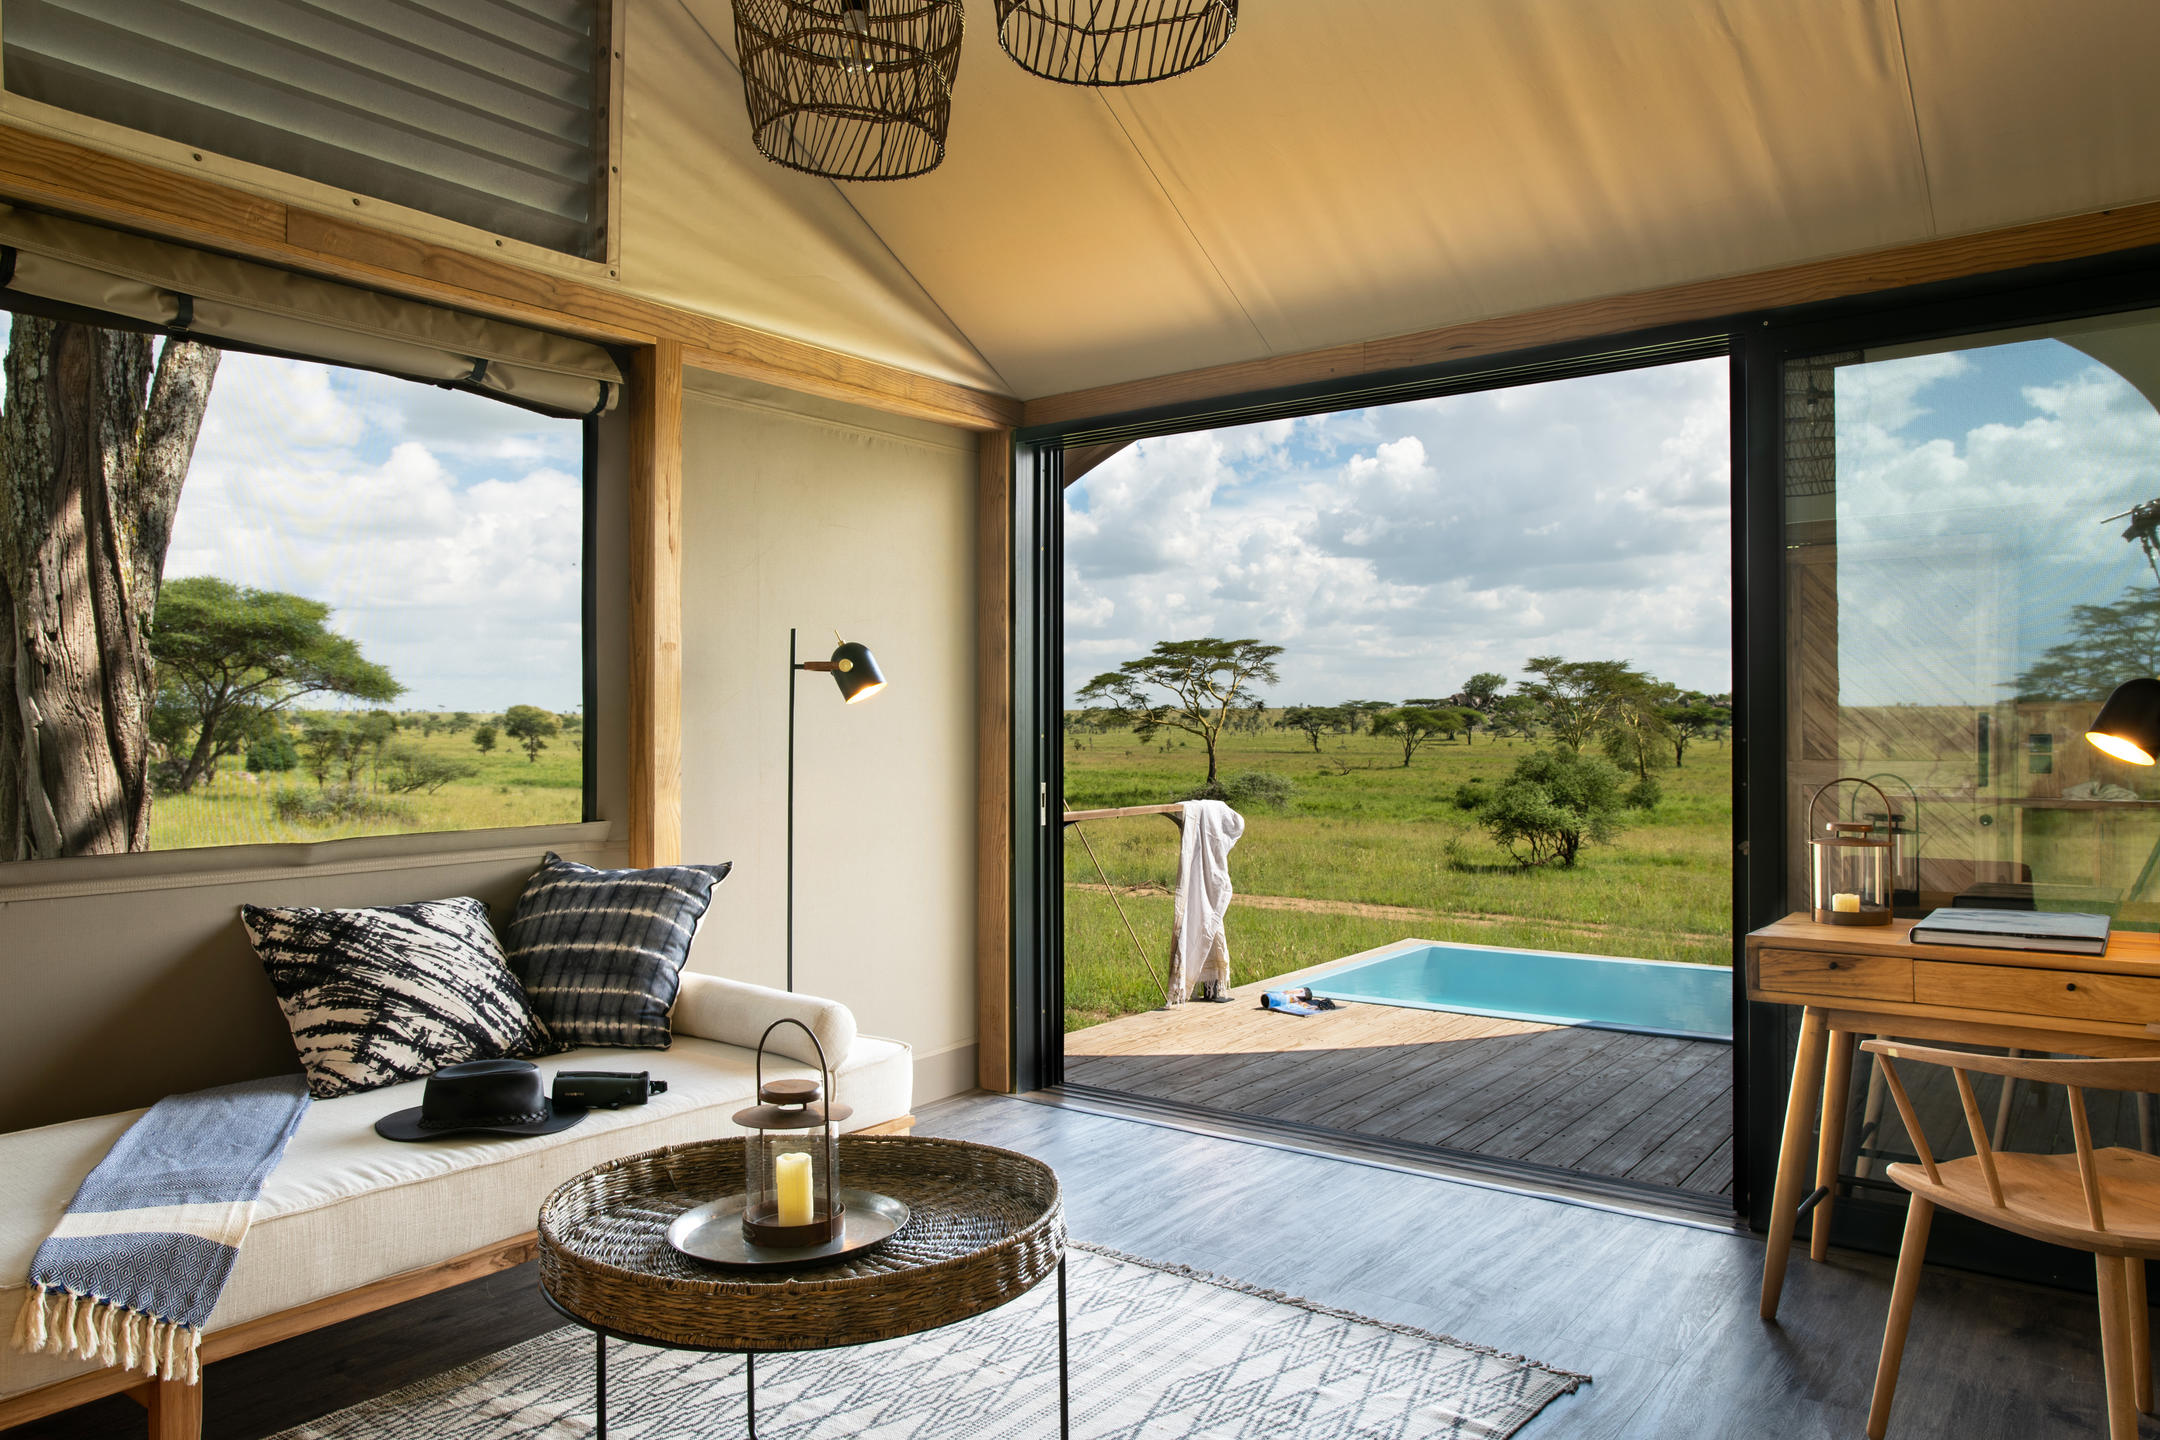 A view out of one of the tented suites at the Lemala Nanyukie Lodge